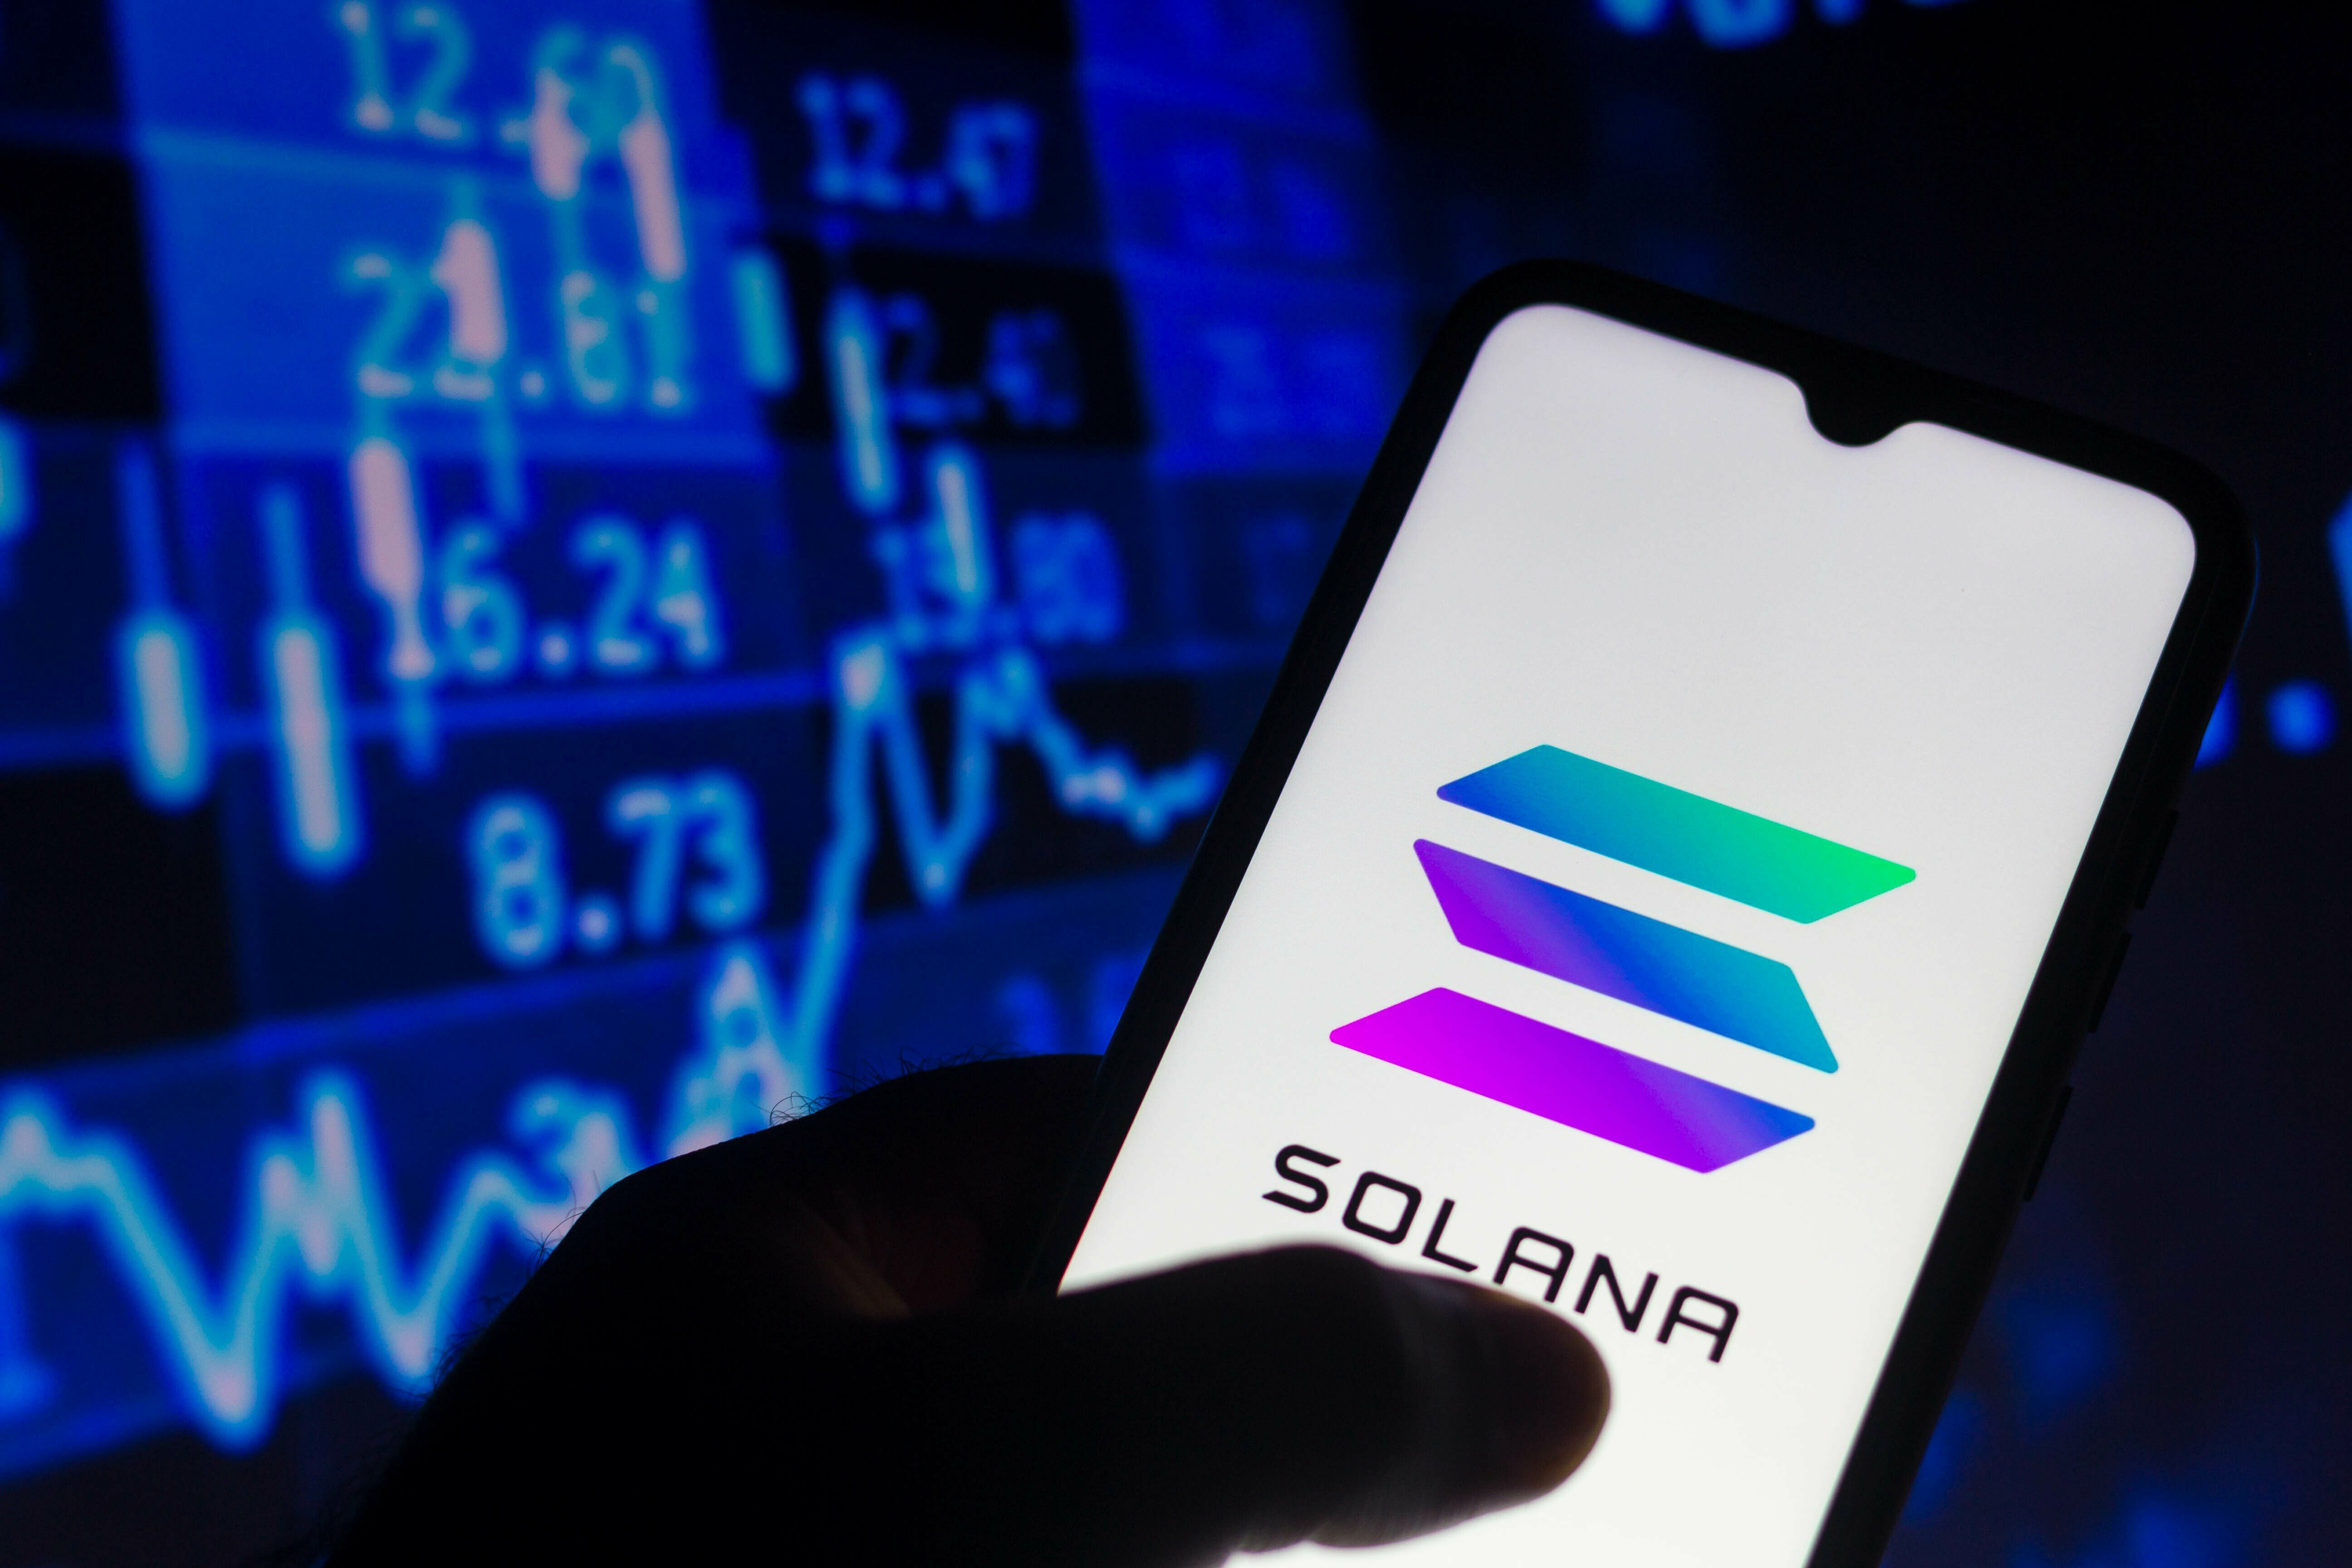 SOL is 'Not a Security', Insists Solana Foundation Amid SEC Lawsuits